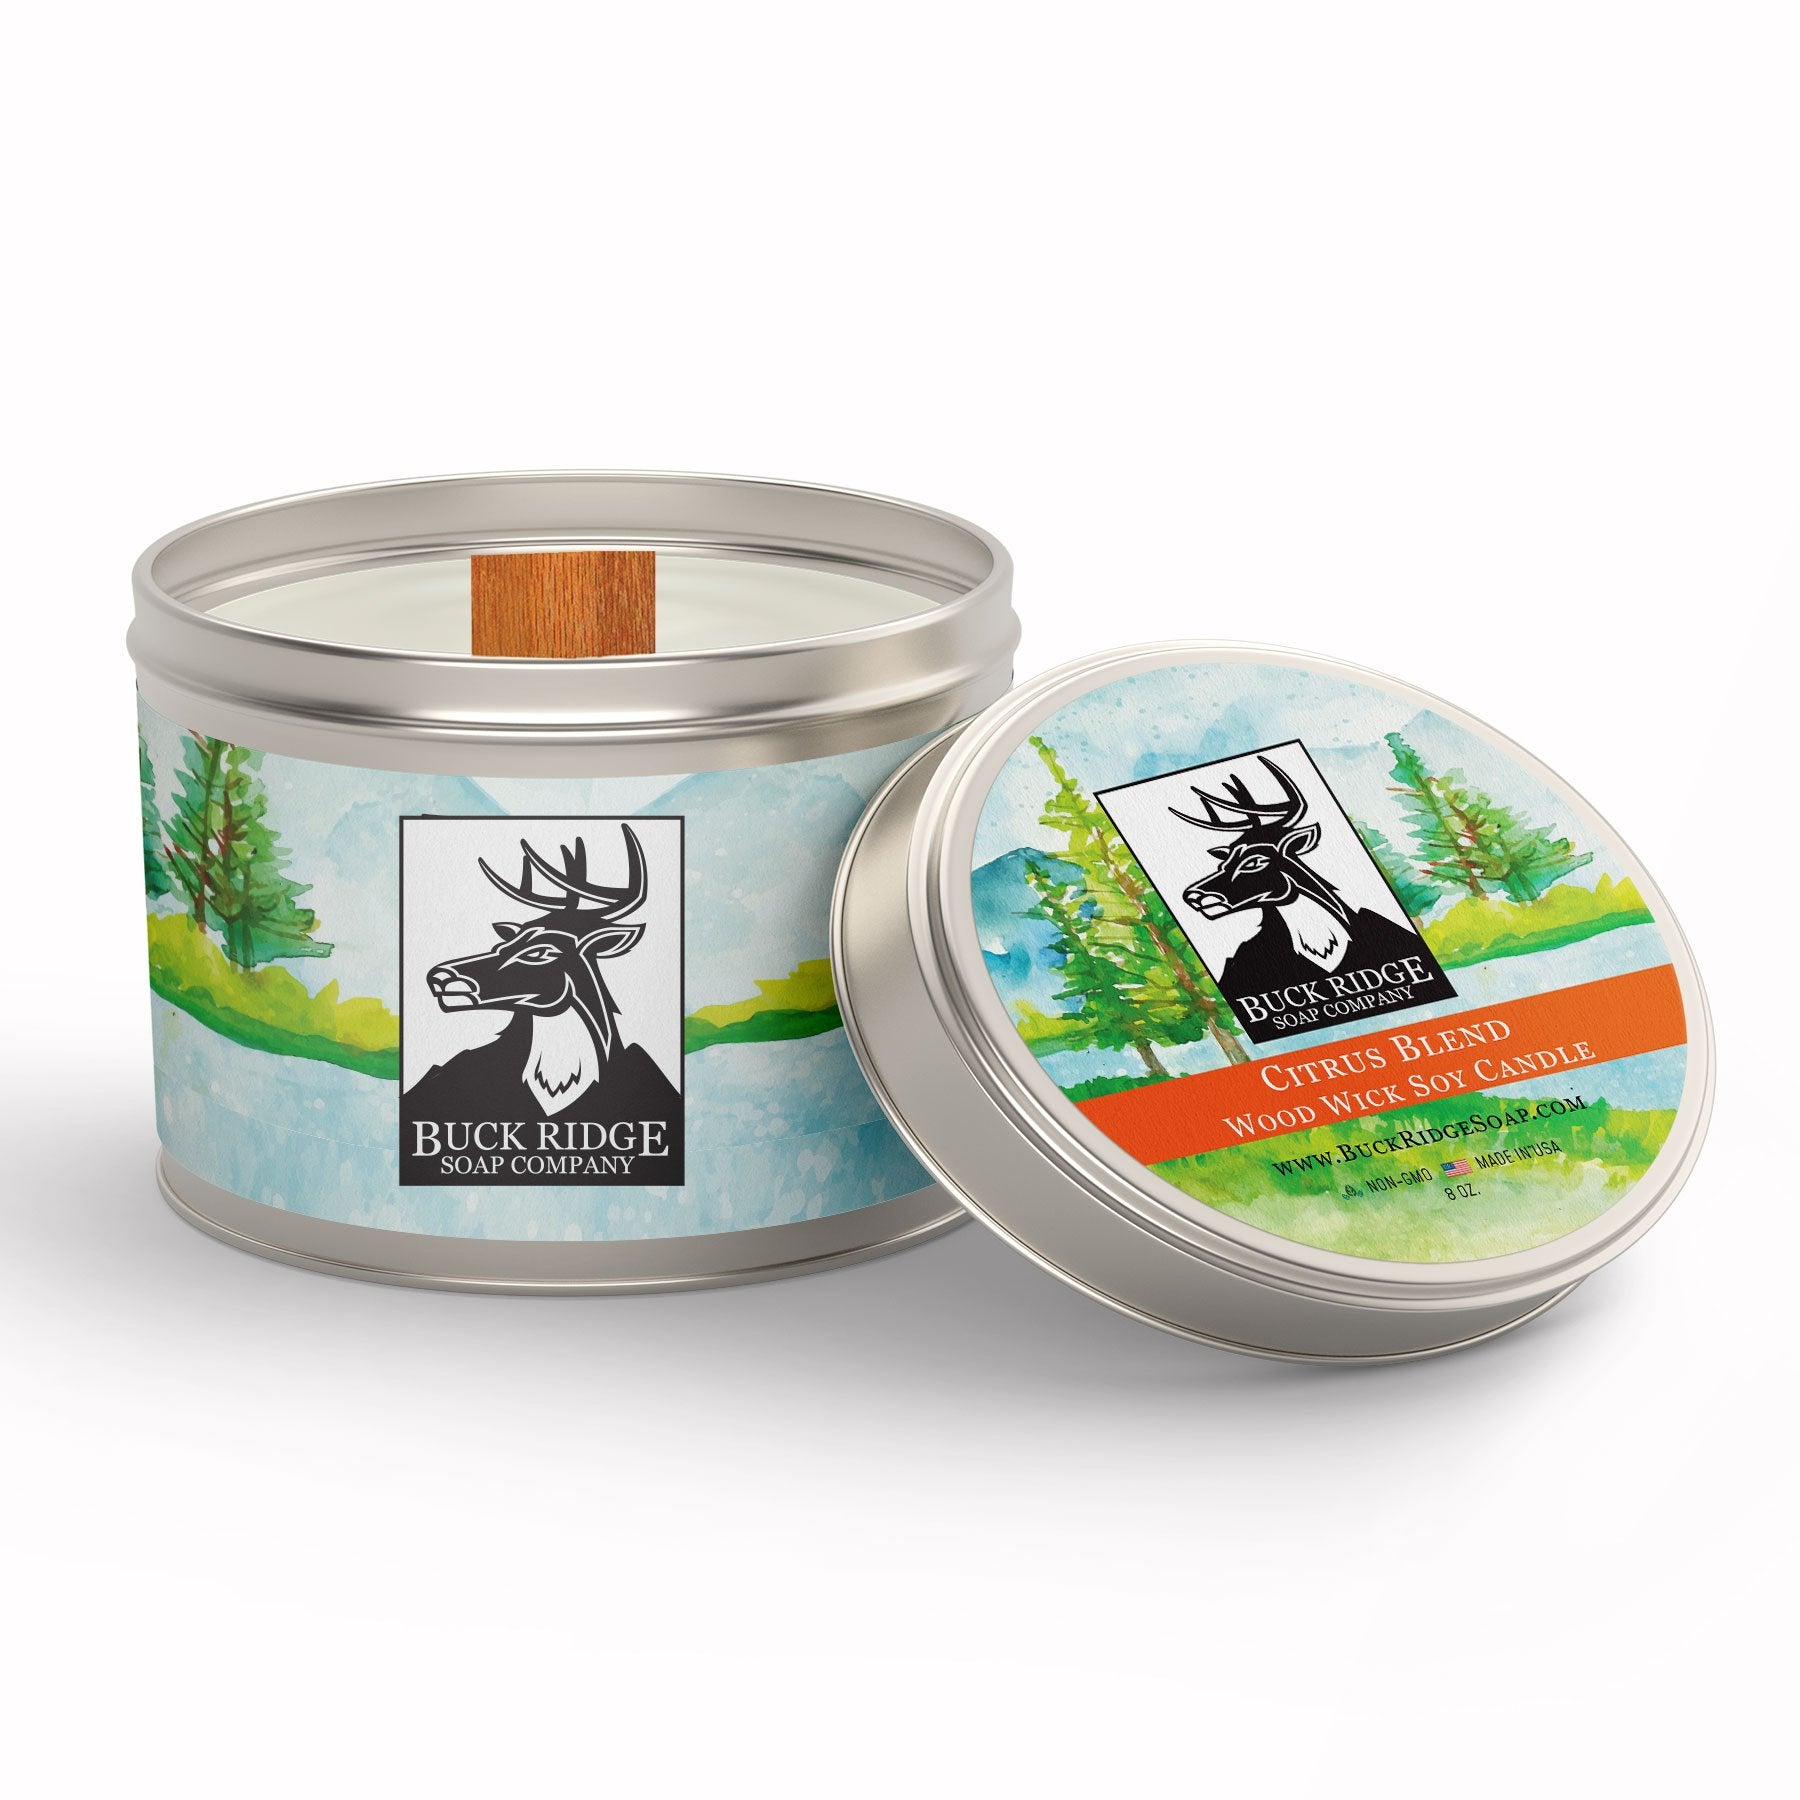 Citrus Blend Sustainable Wood Wick Soy Candle Buck Ridge Soap